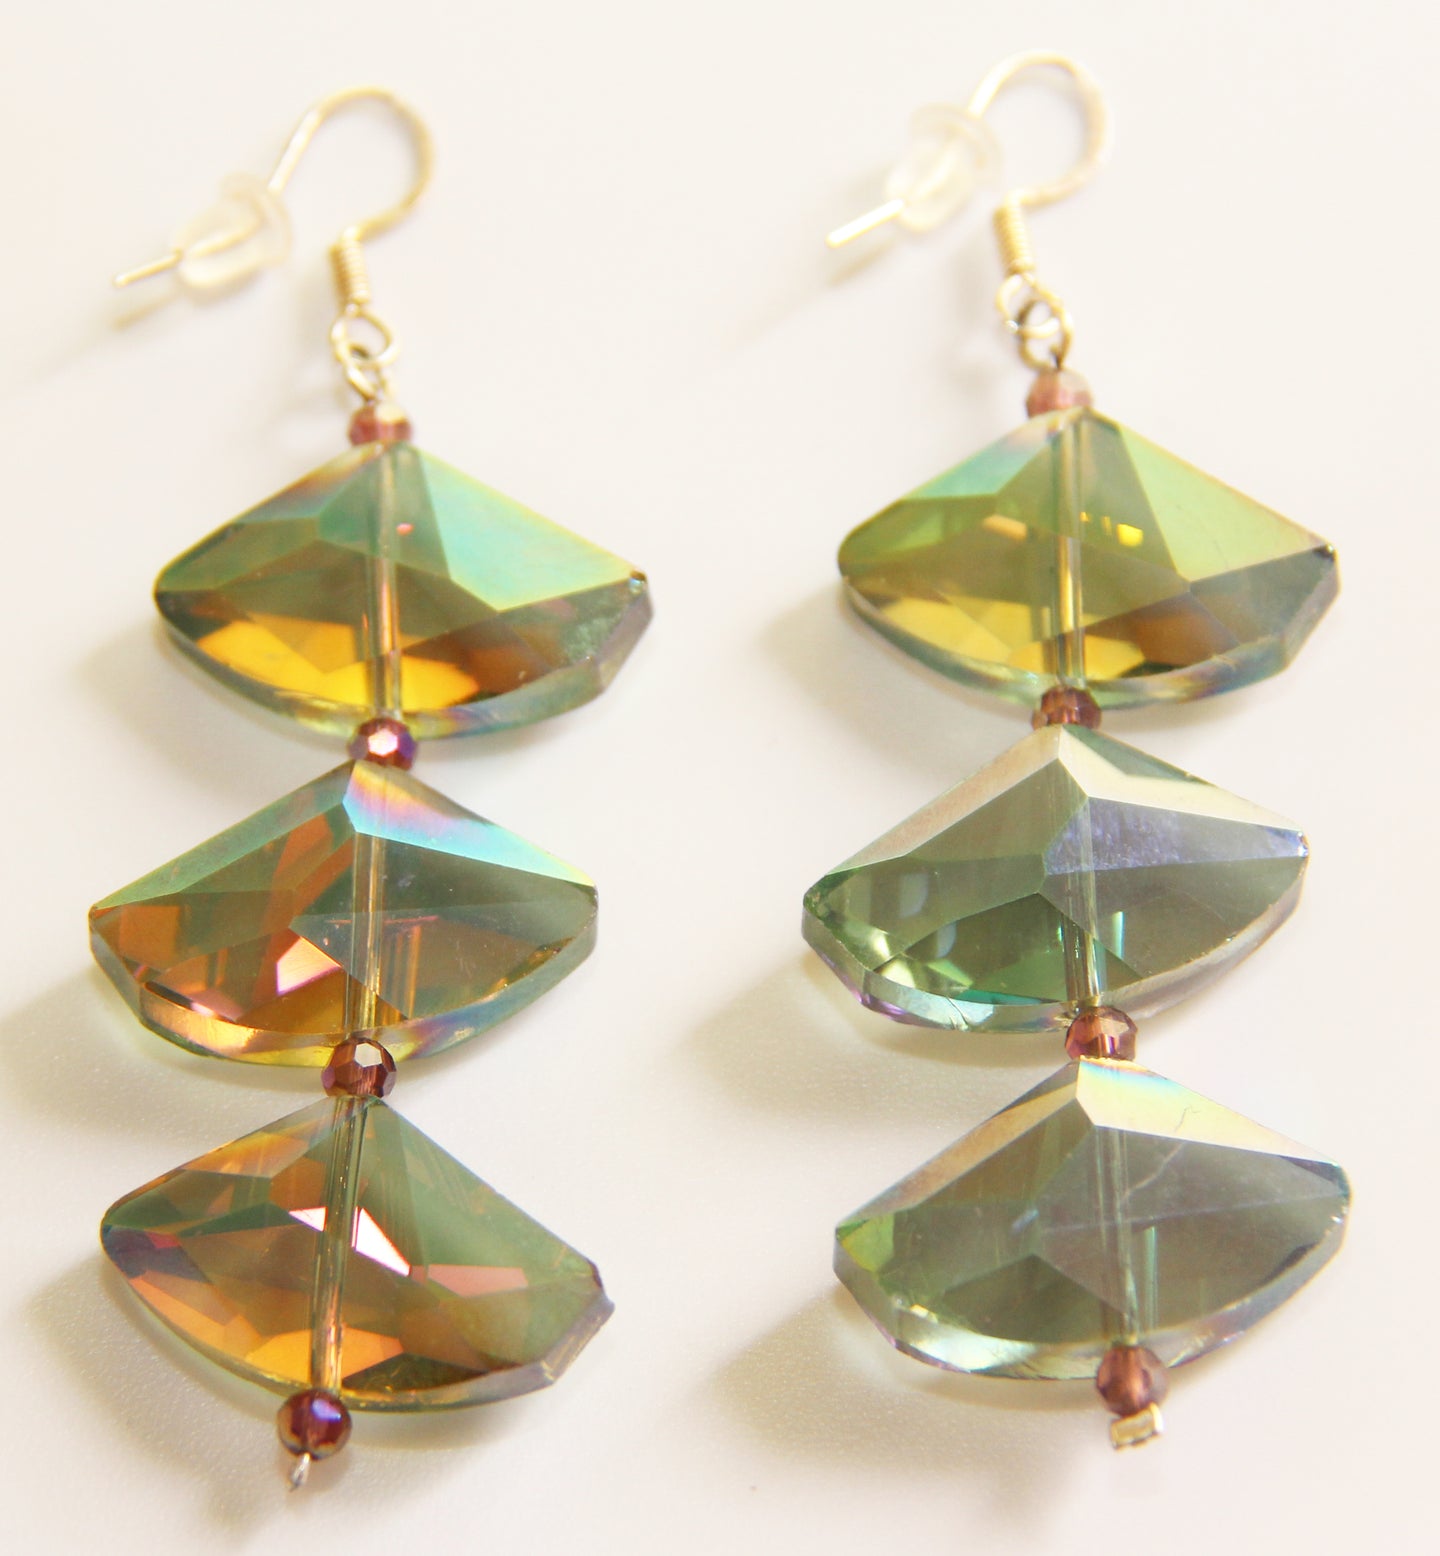 3x Geometric Diamond Faceted Shaped Blue/Green/Purple Blend Crystals Earrings